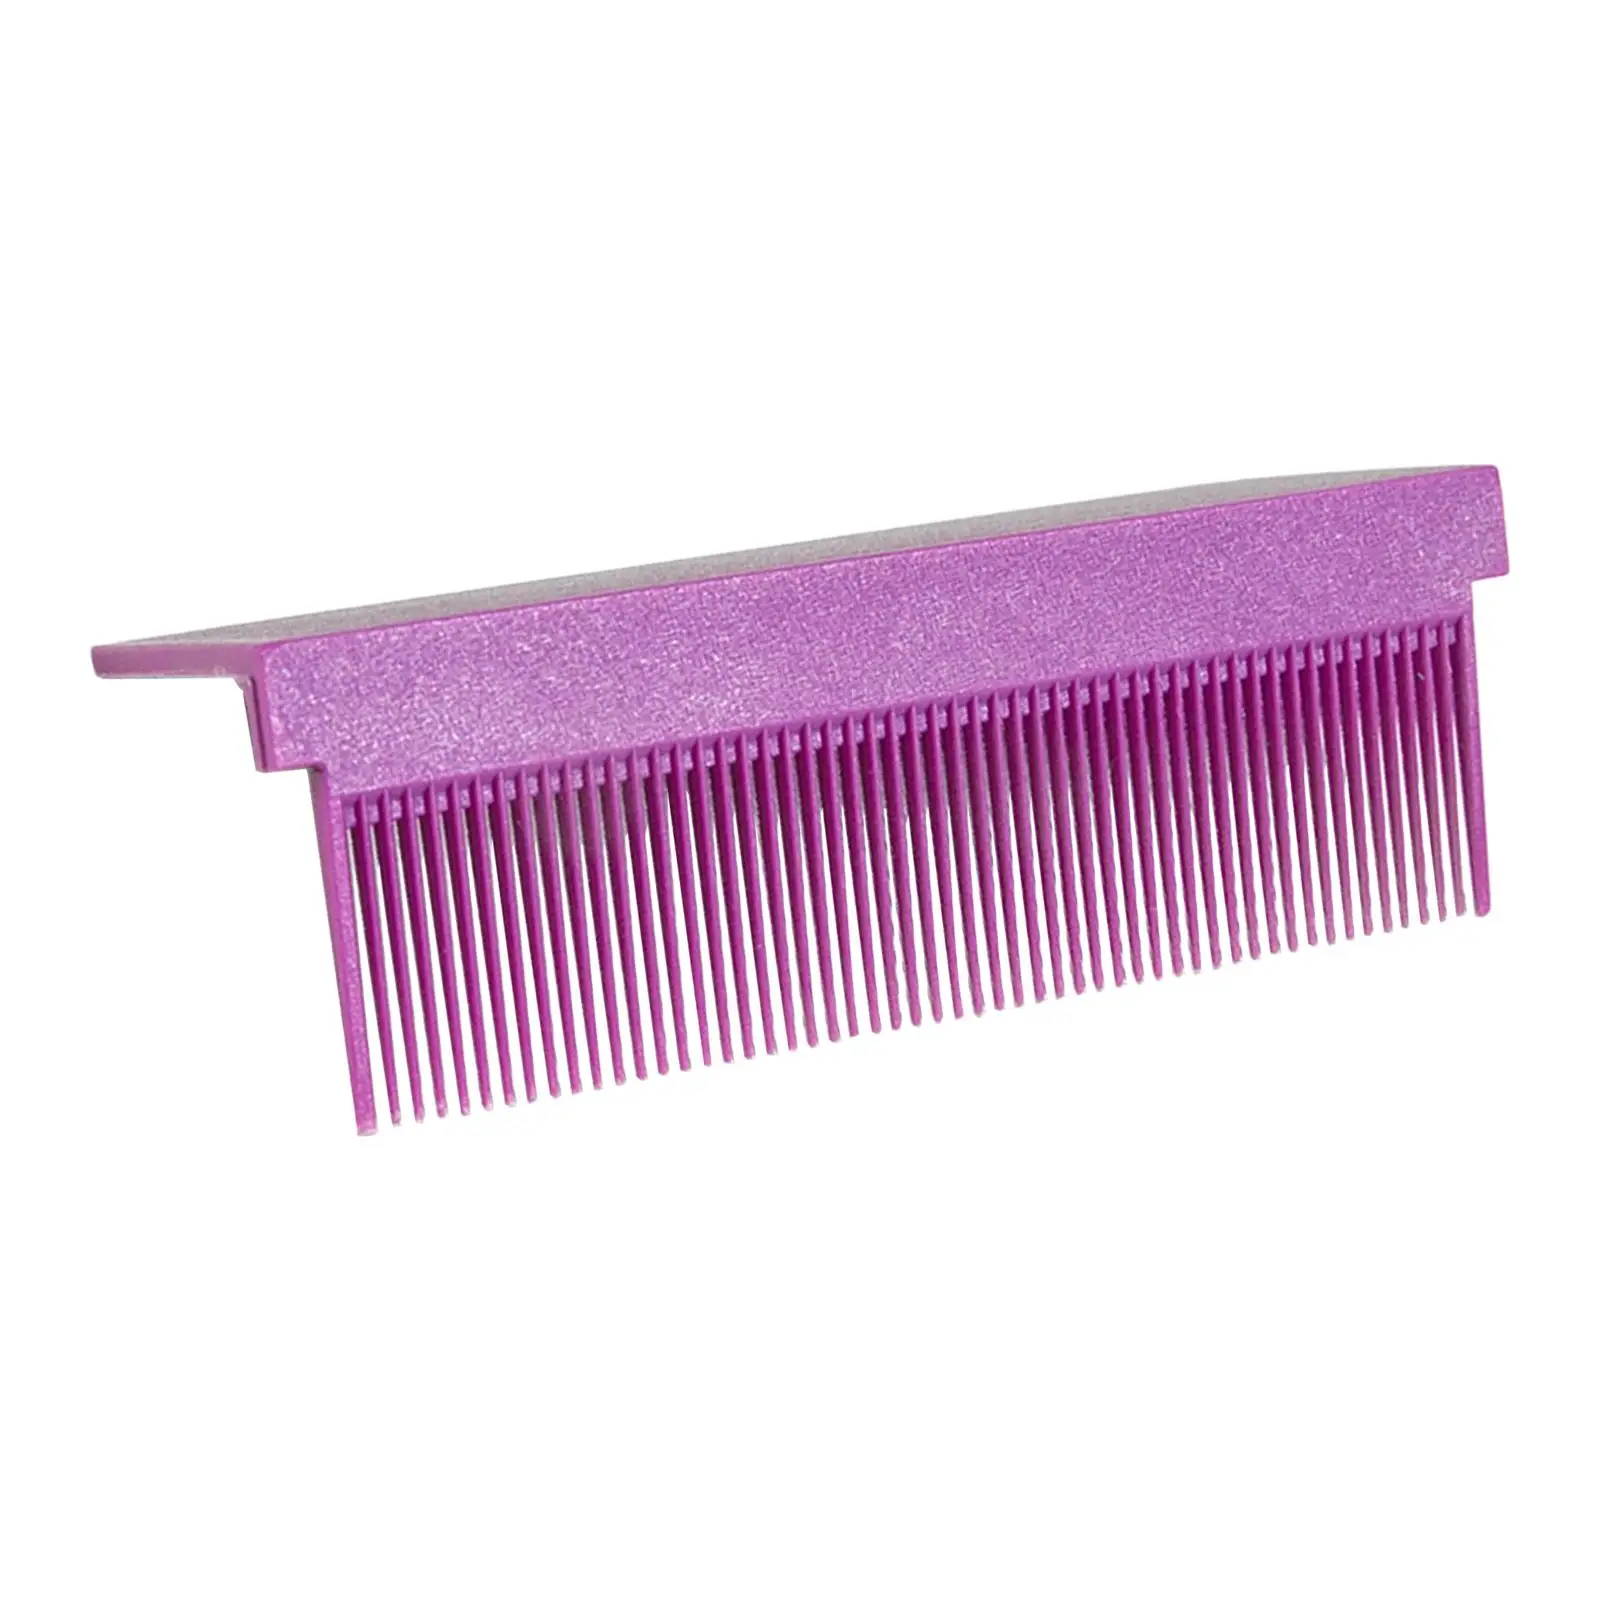 Plastic Comb Accessory for Folding Hair Straightener Washable Lightweight Easily Carry